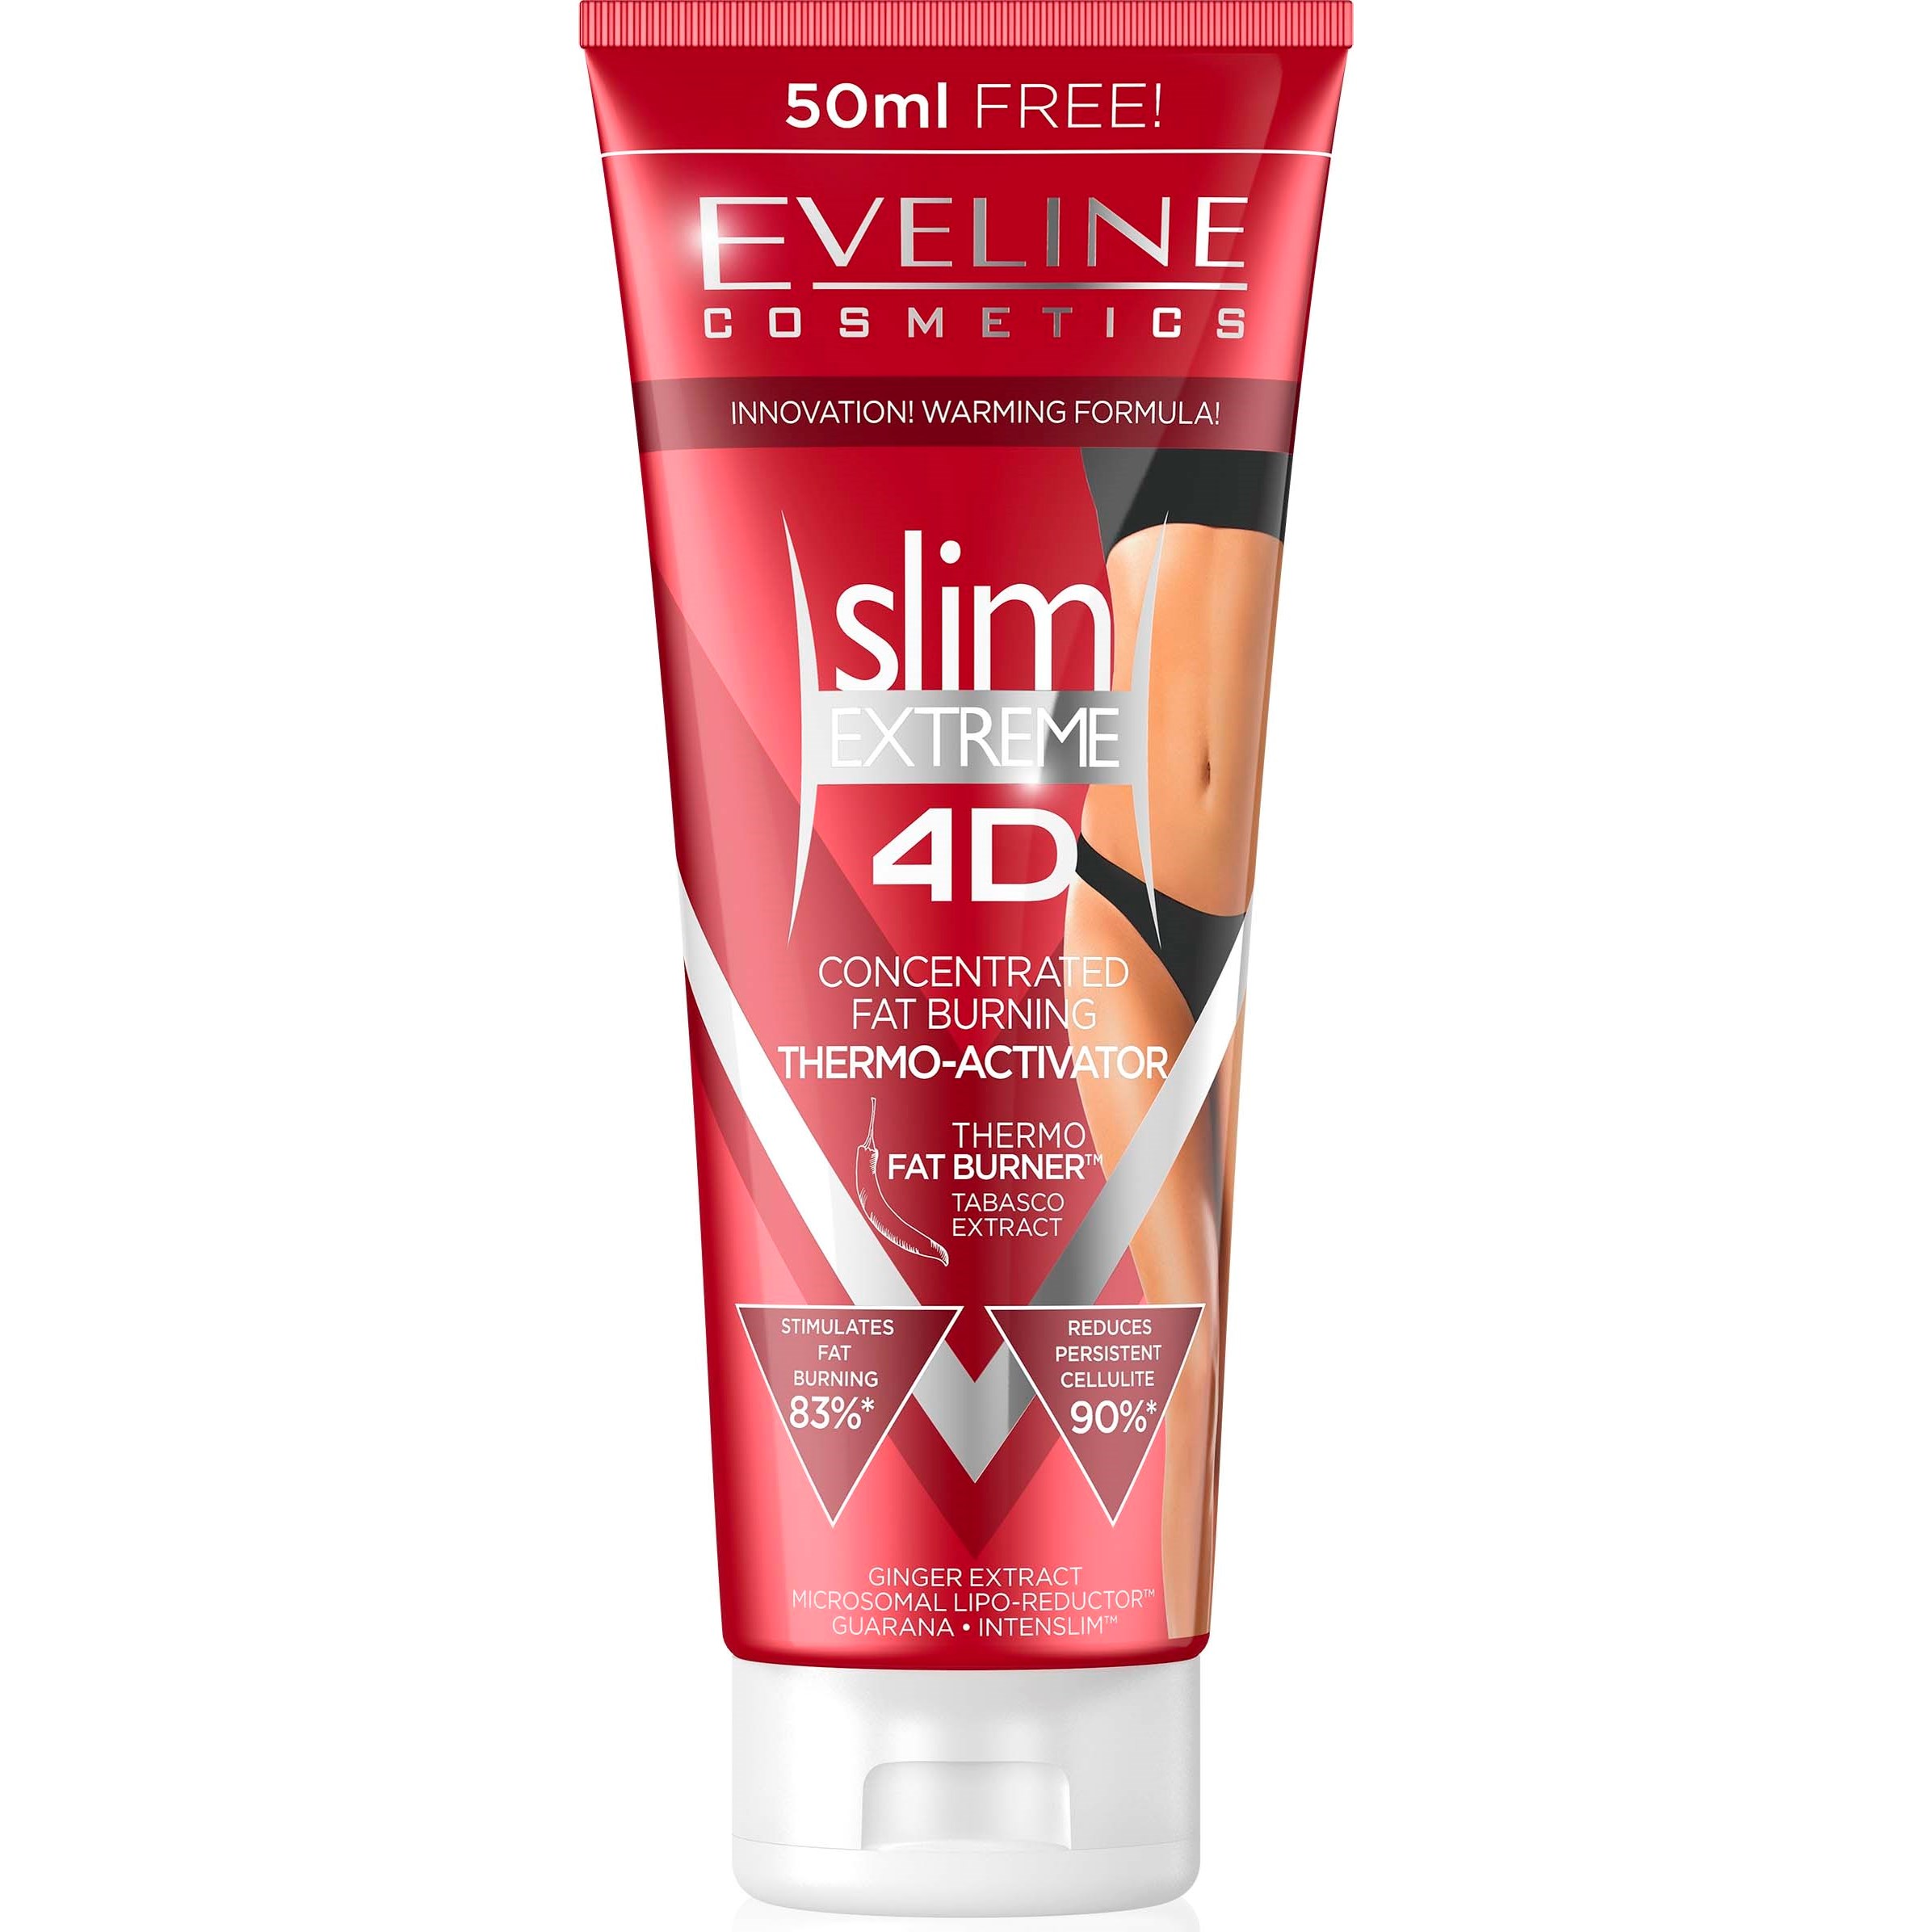 Bilde av Eveline Cosmetics Slim Extreme 4d Concentrated Fat Burning Thermo-acti